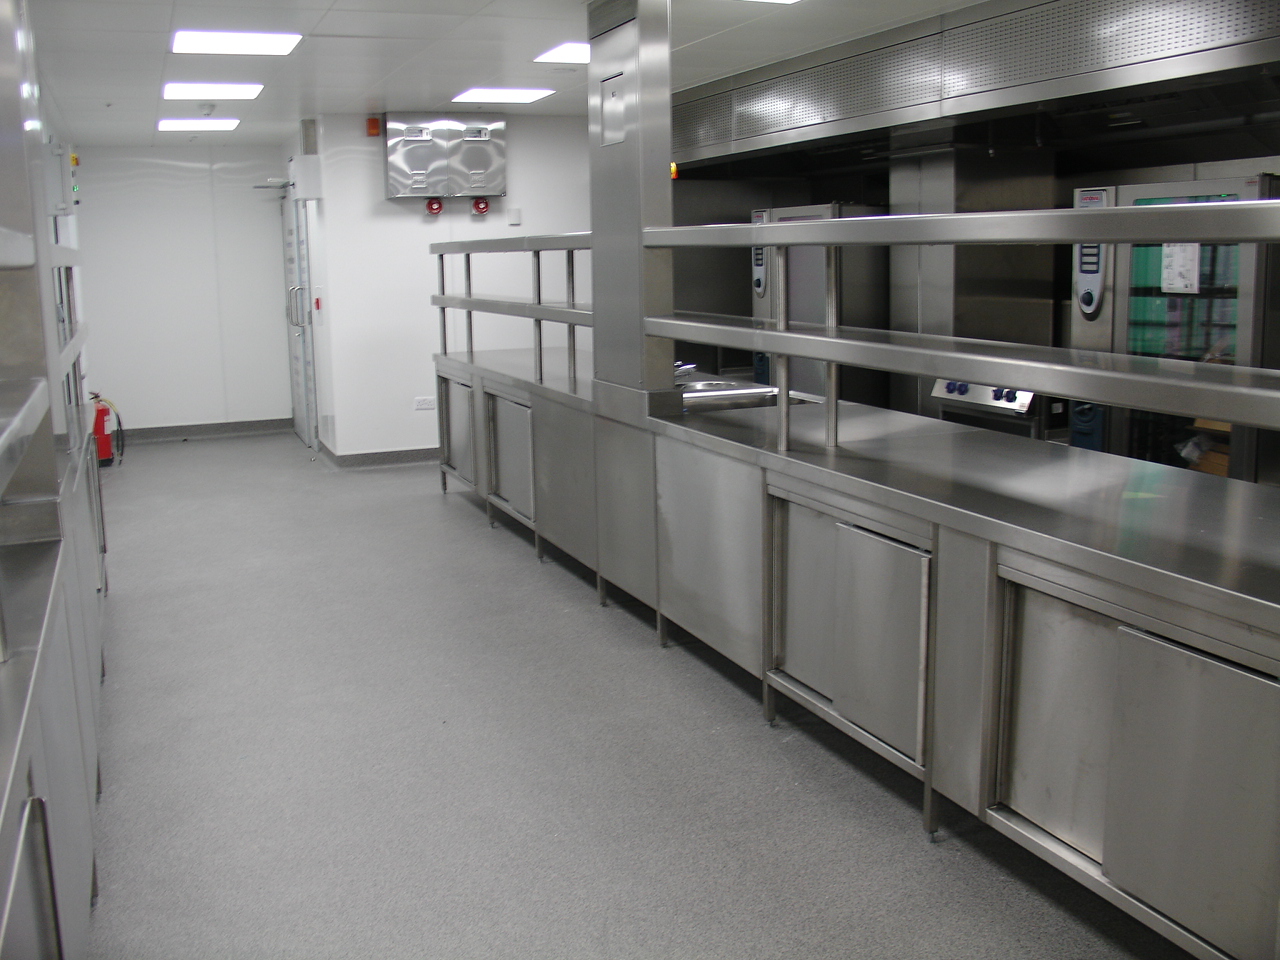 Commercial Kitchen Hygienic Flooring